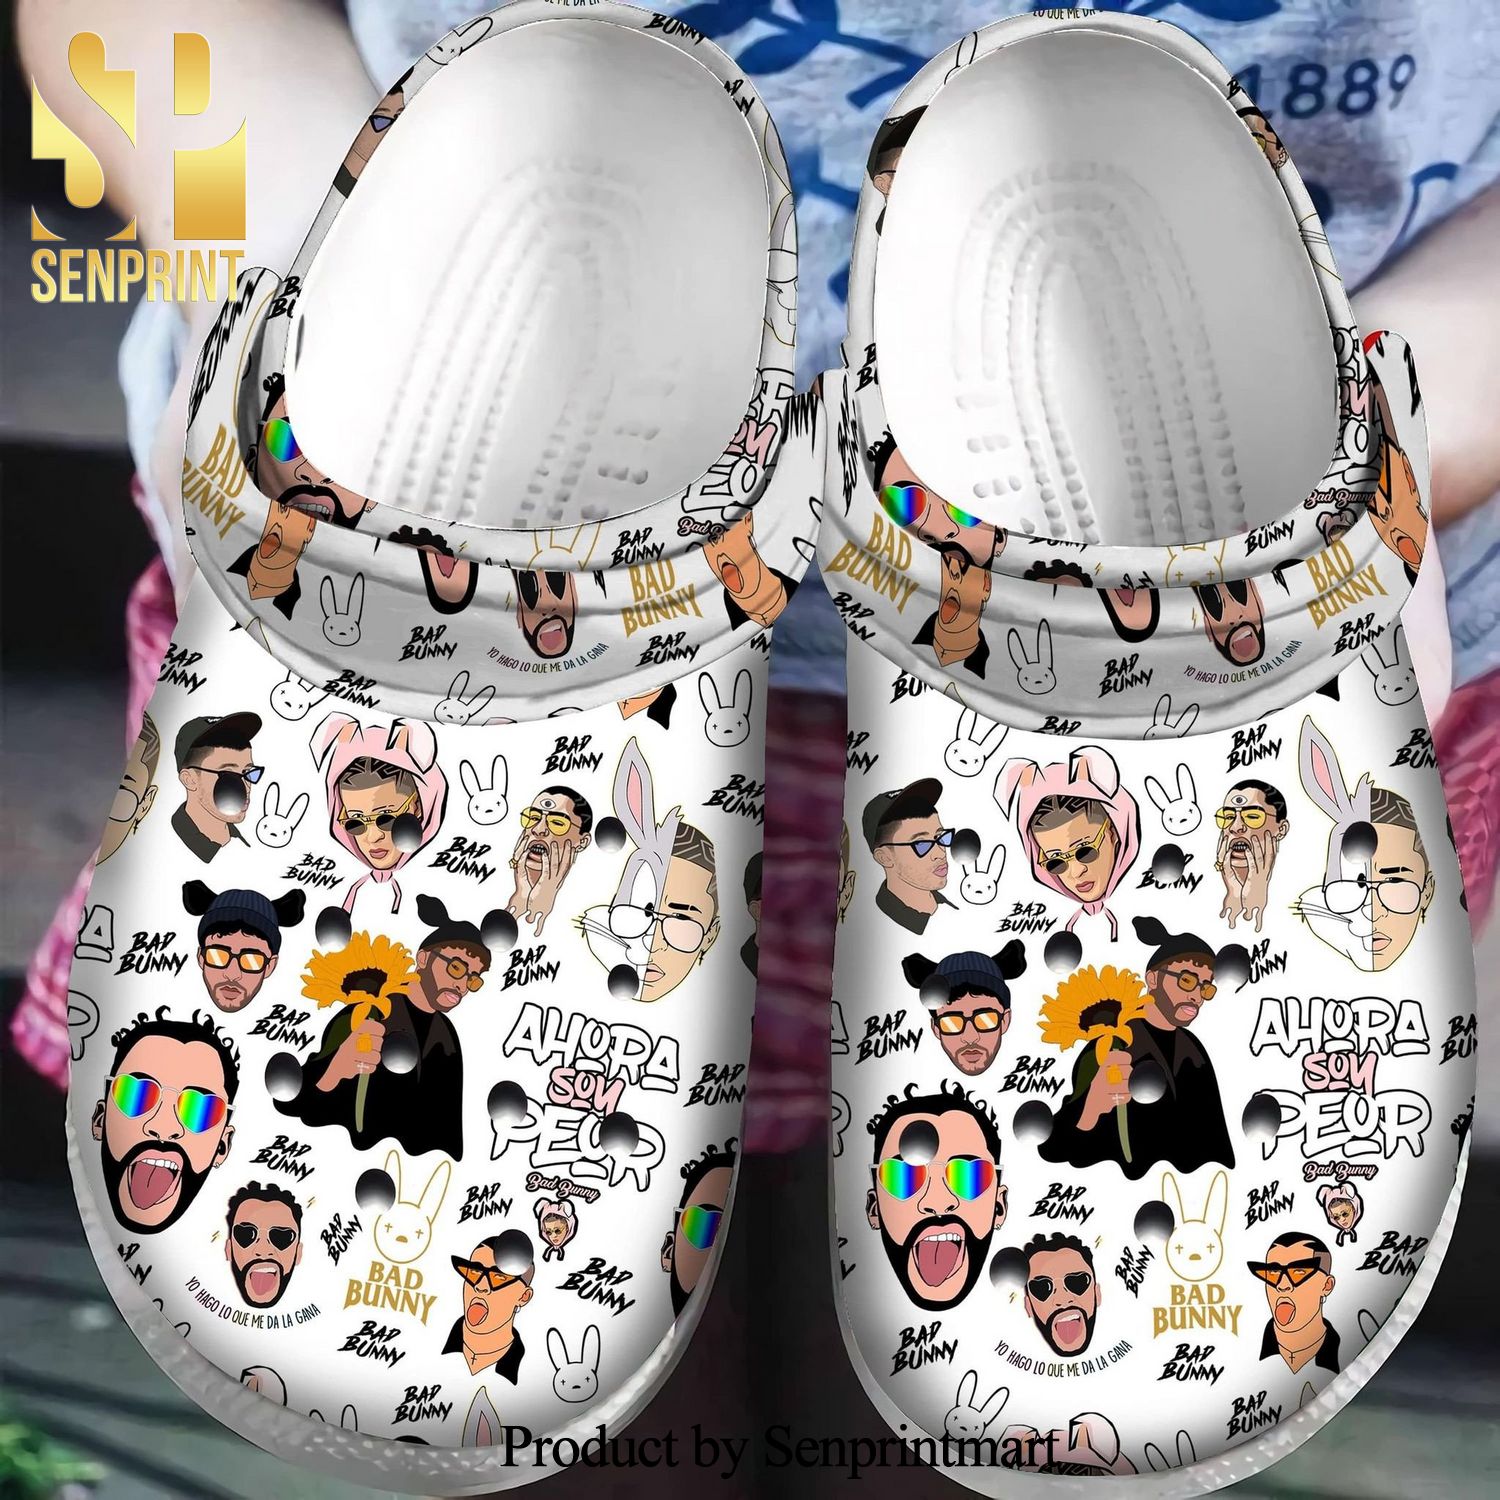 Soy Peor Bad Bunny Gift For Fan Classic Water Crocs Crocband Adult Clogs